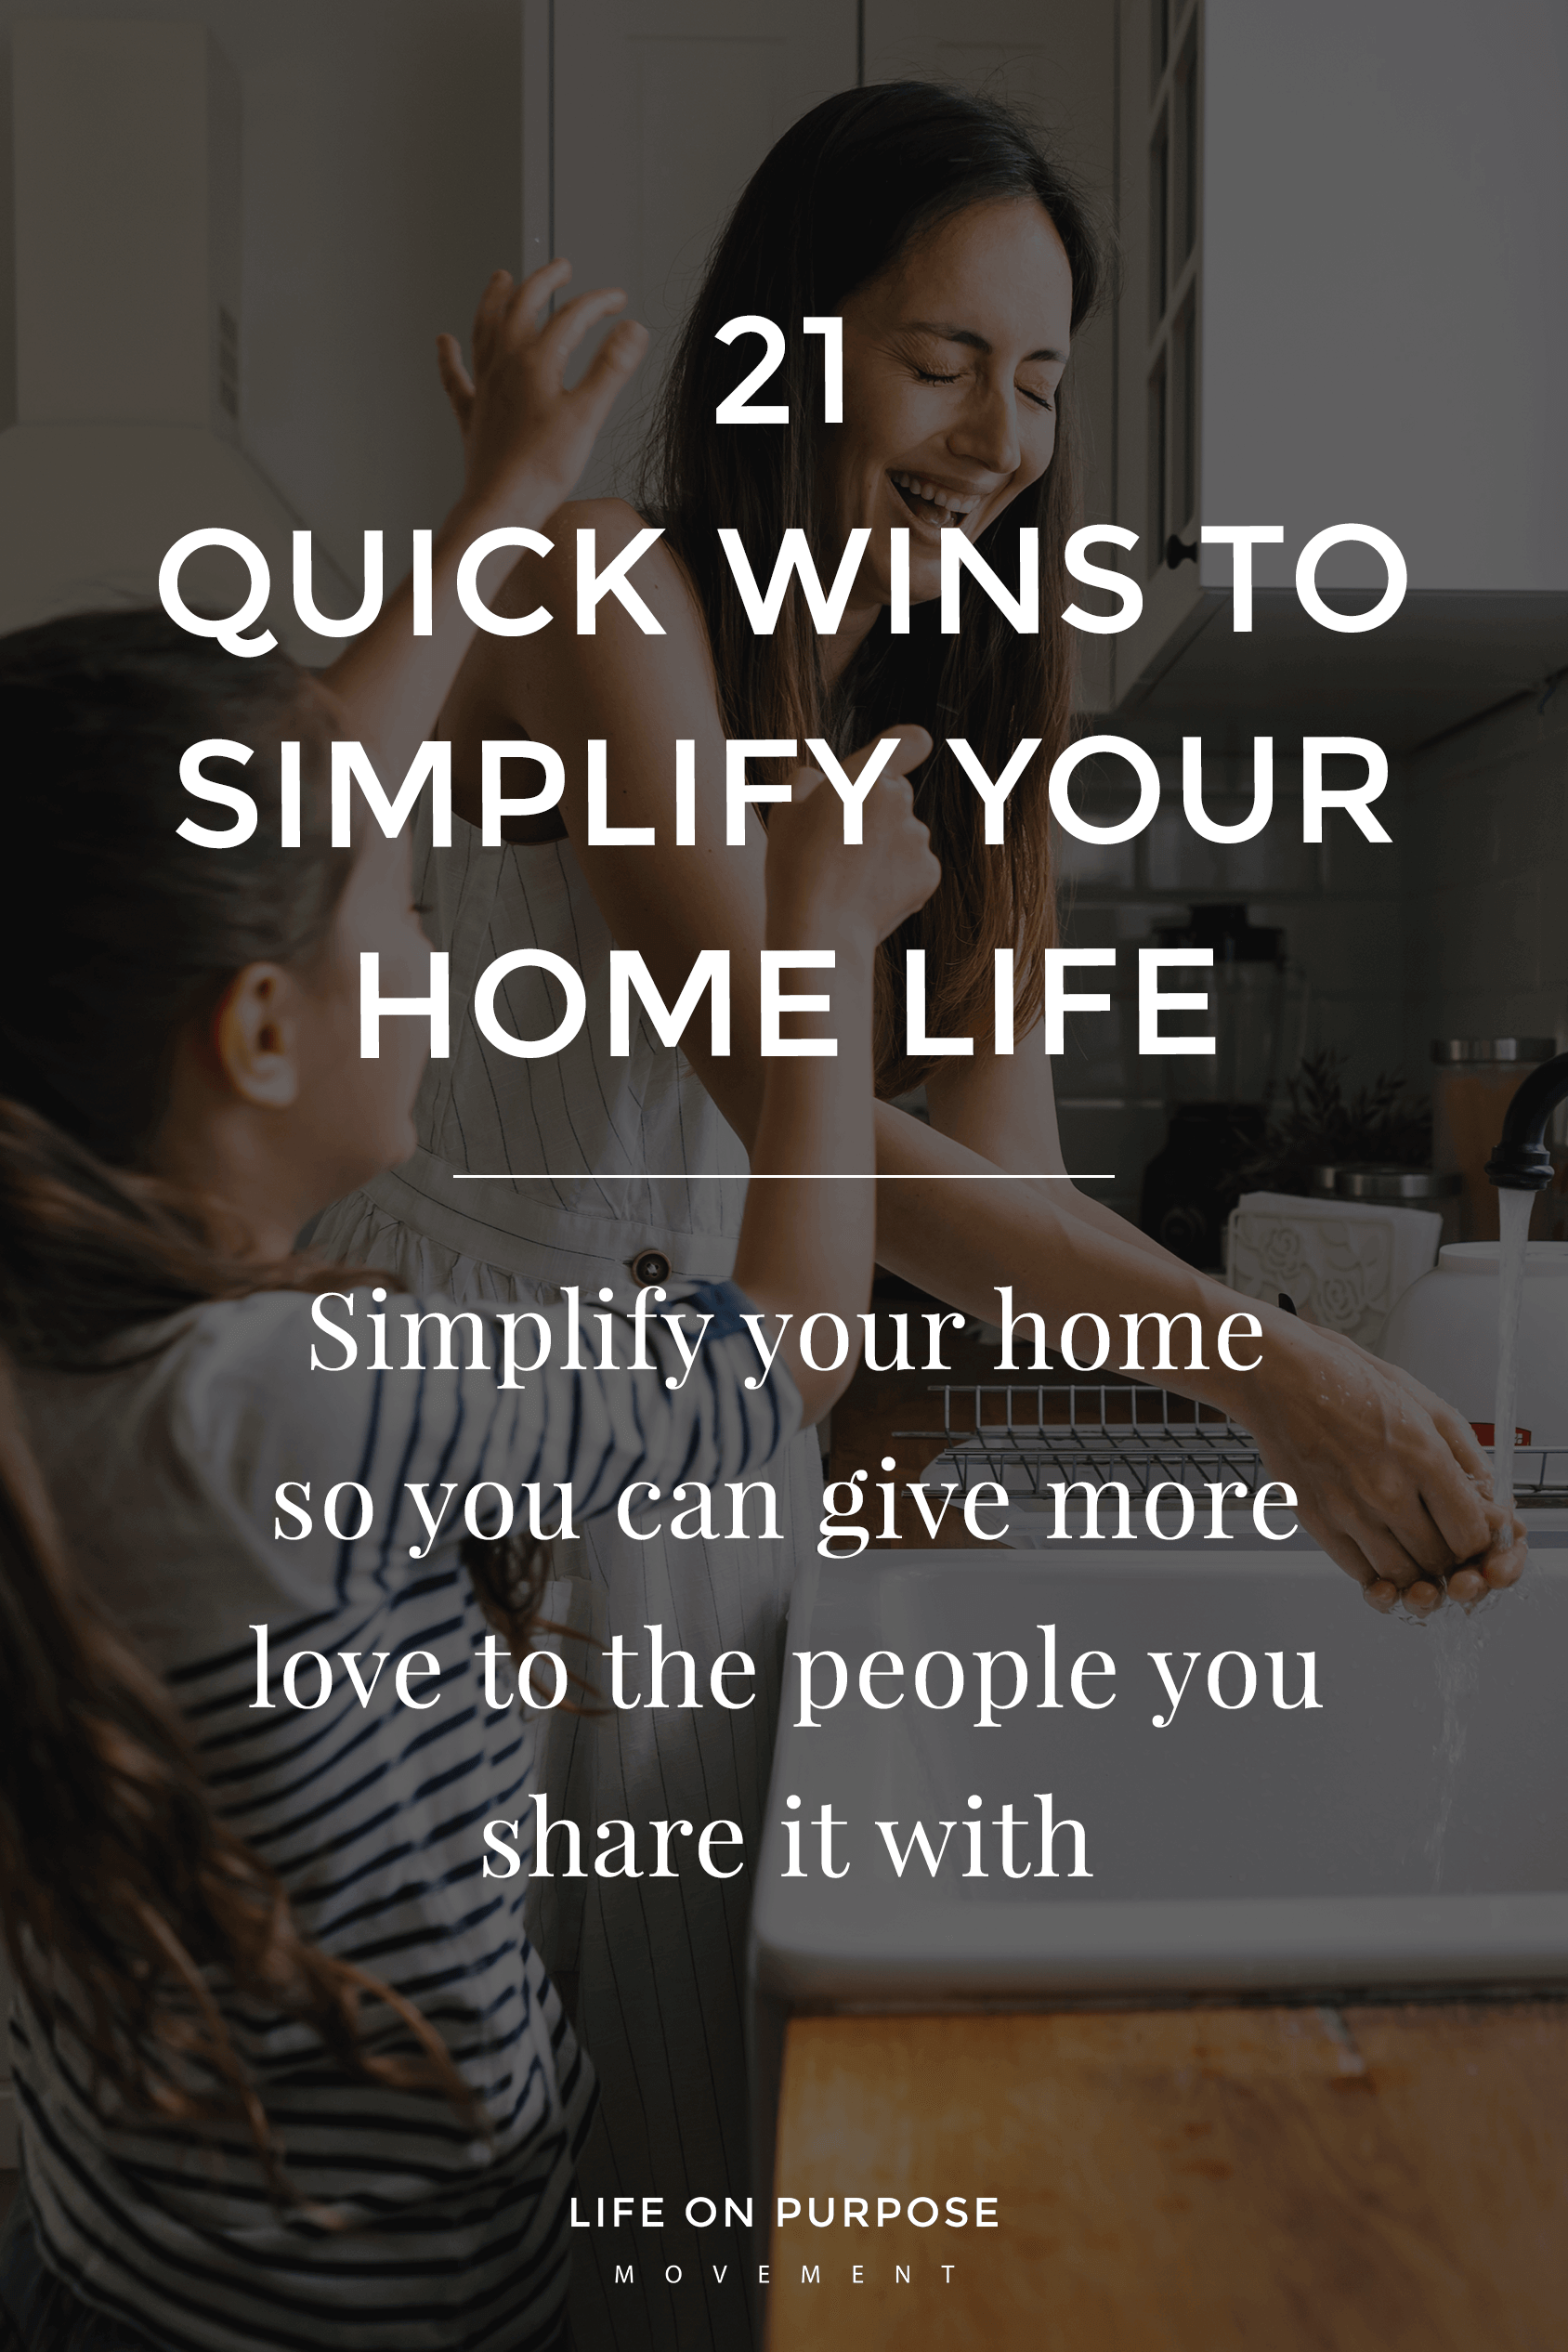 simplify your life quotes